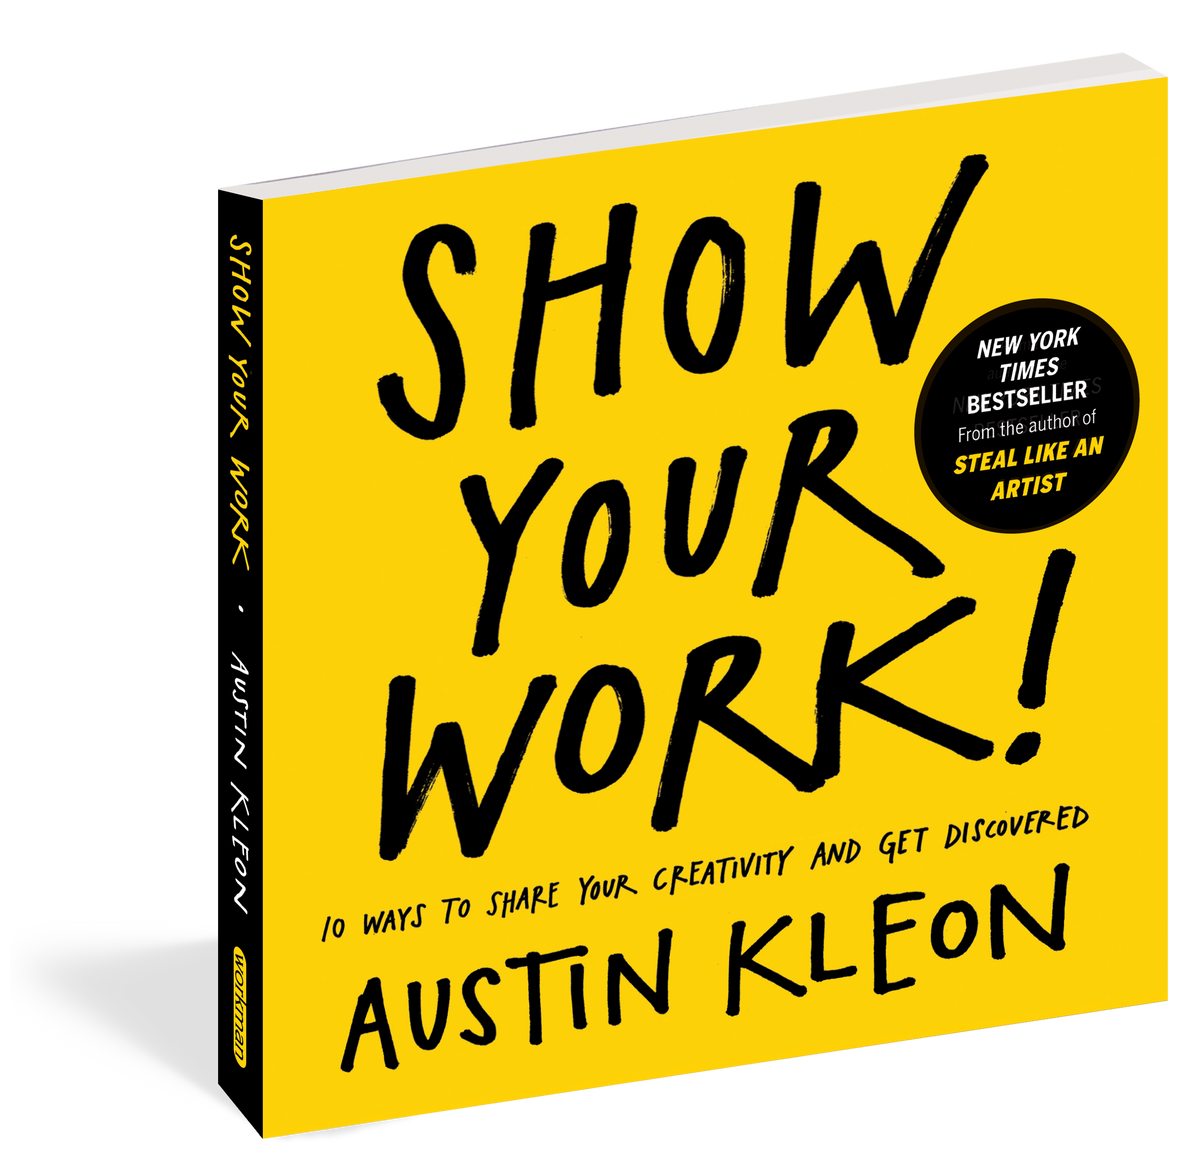 Show Your Work 10 Ways 10 Ways to Share Your Creativity and Get Discovered